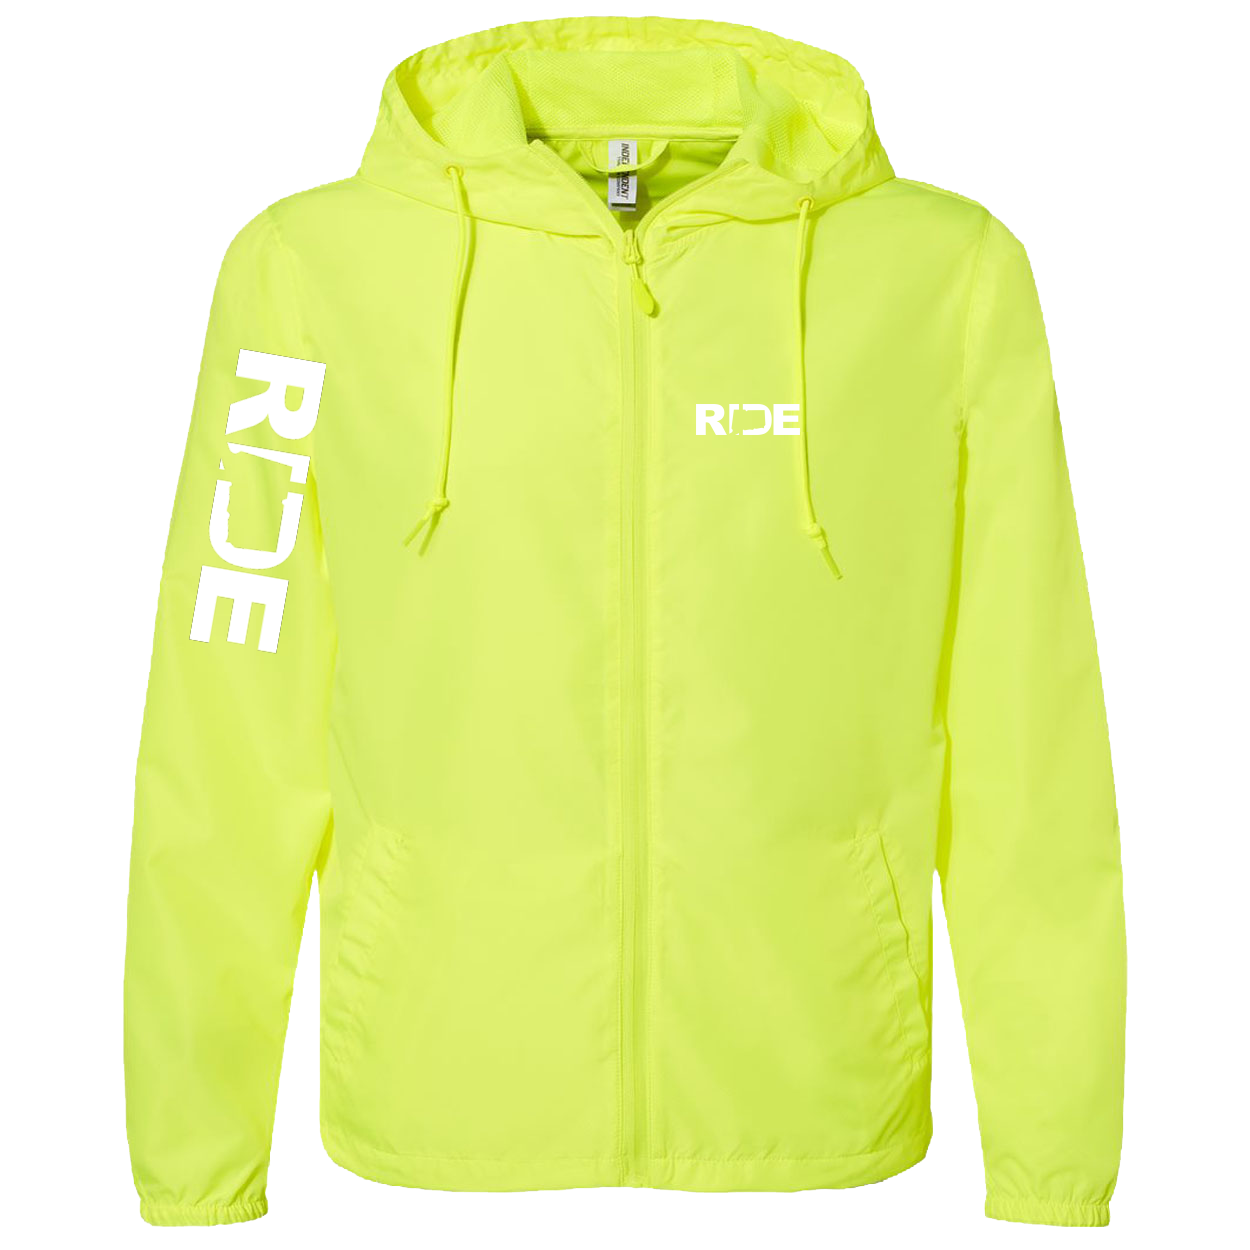 Ride Connecticut Classic Lightweight Windbreaker Safety Yellow 